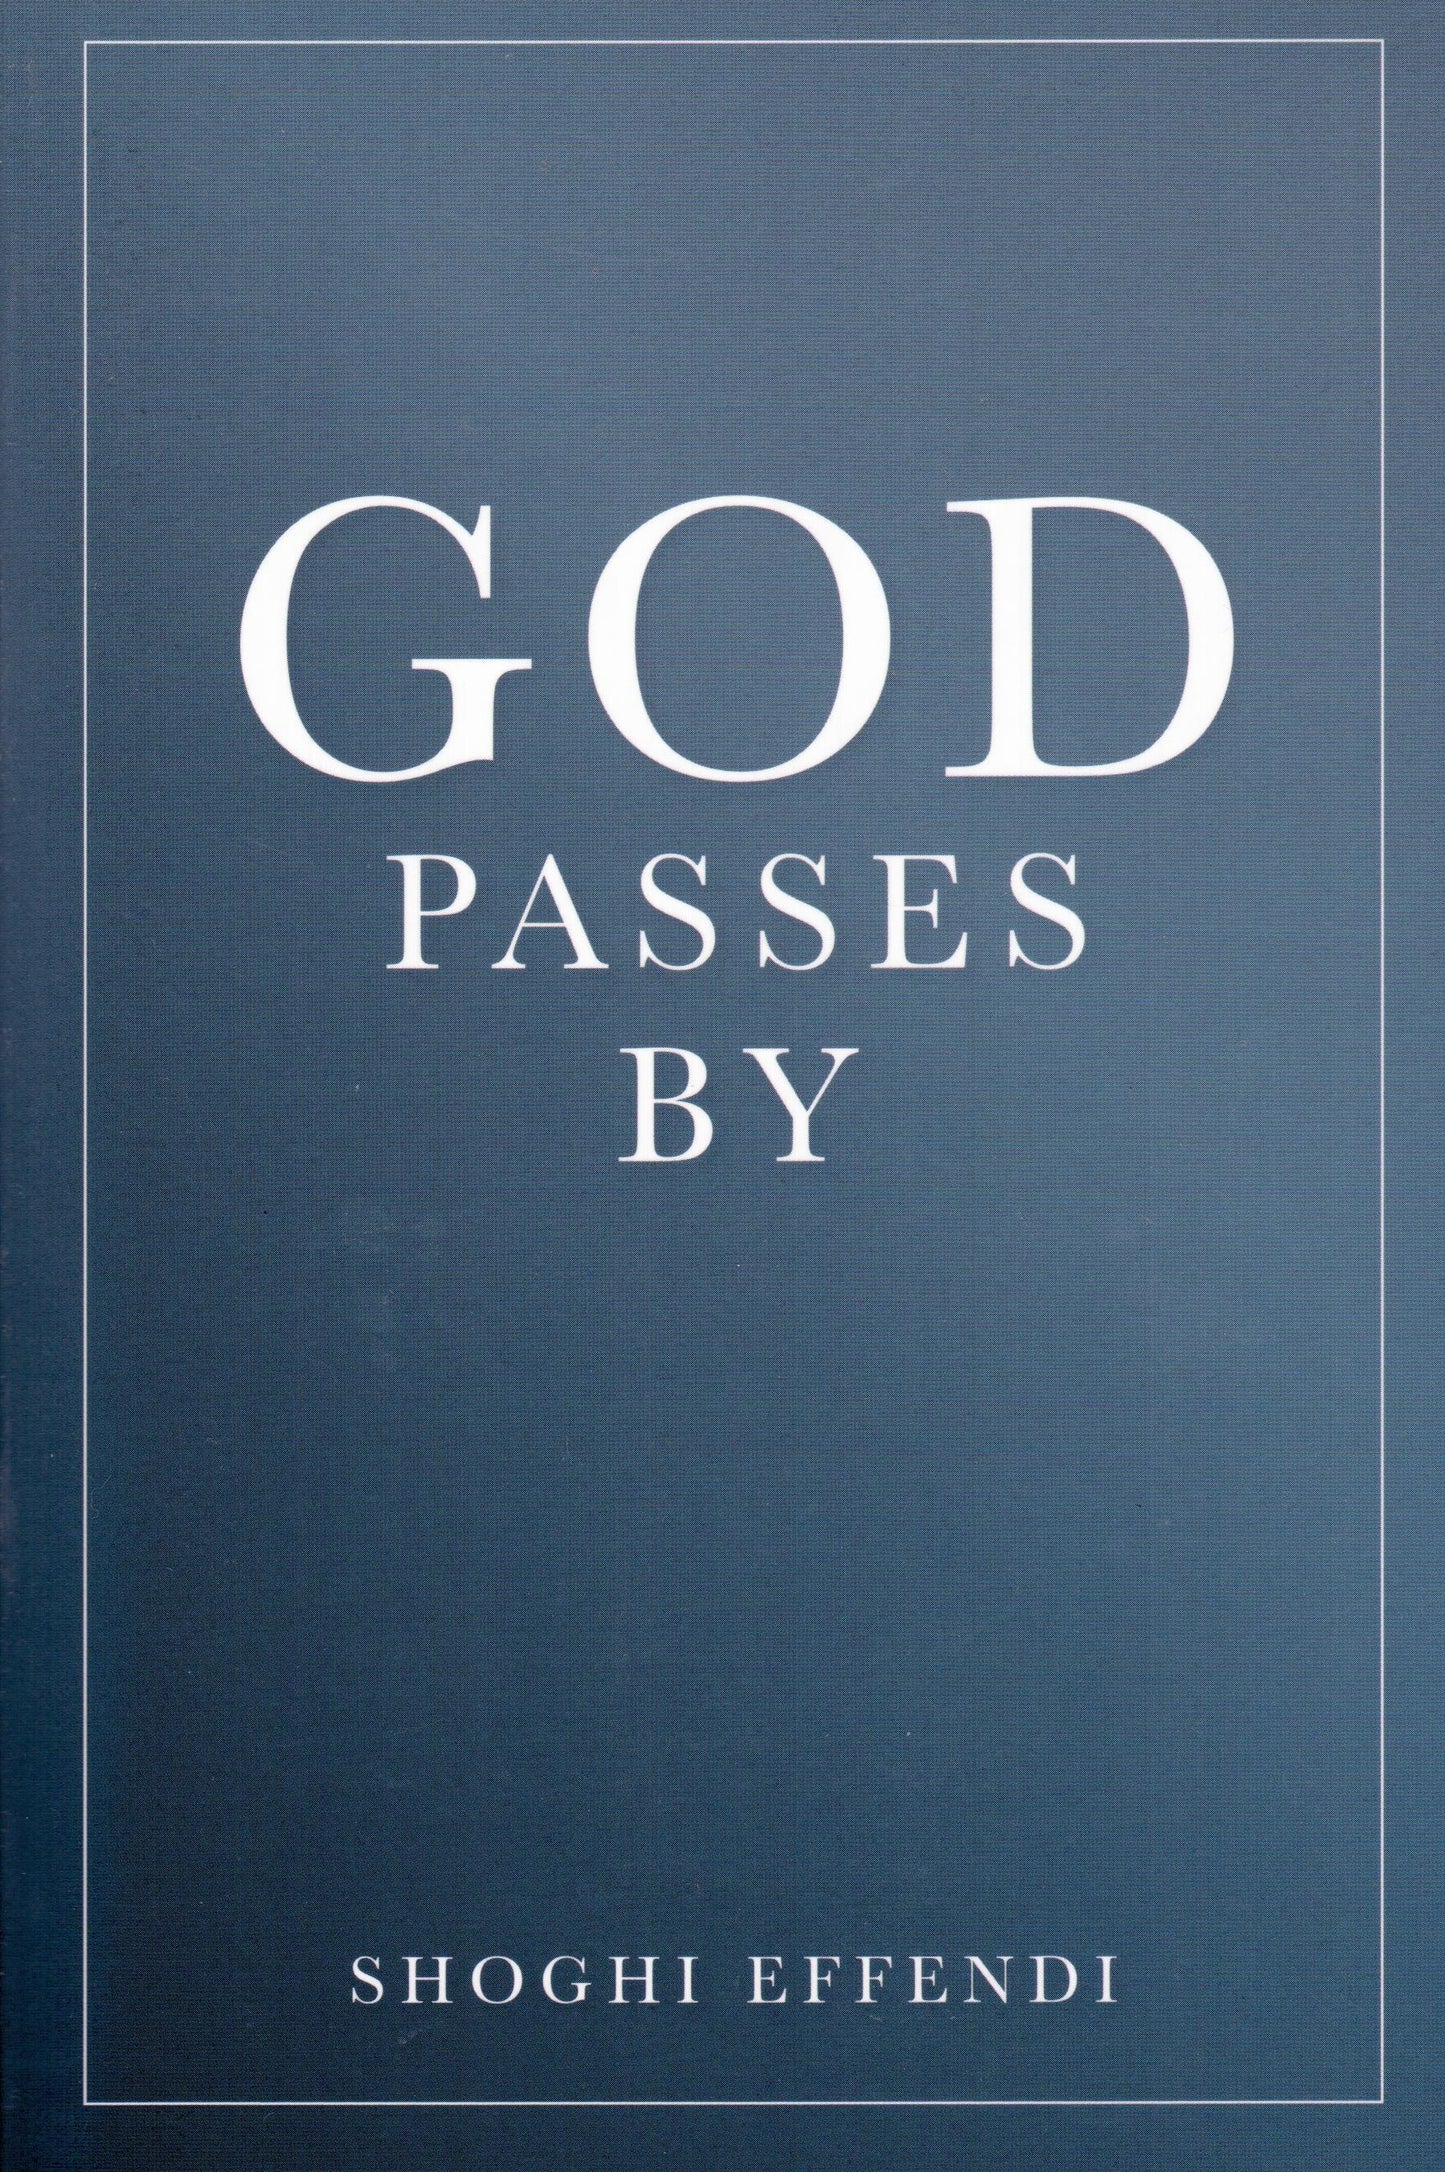 God Passes By